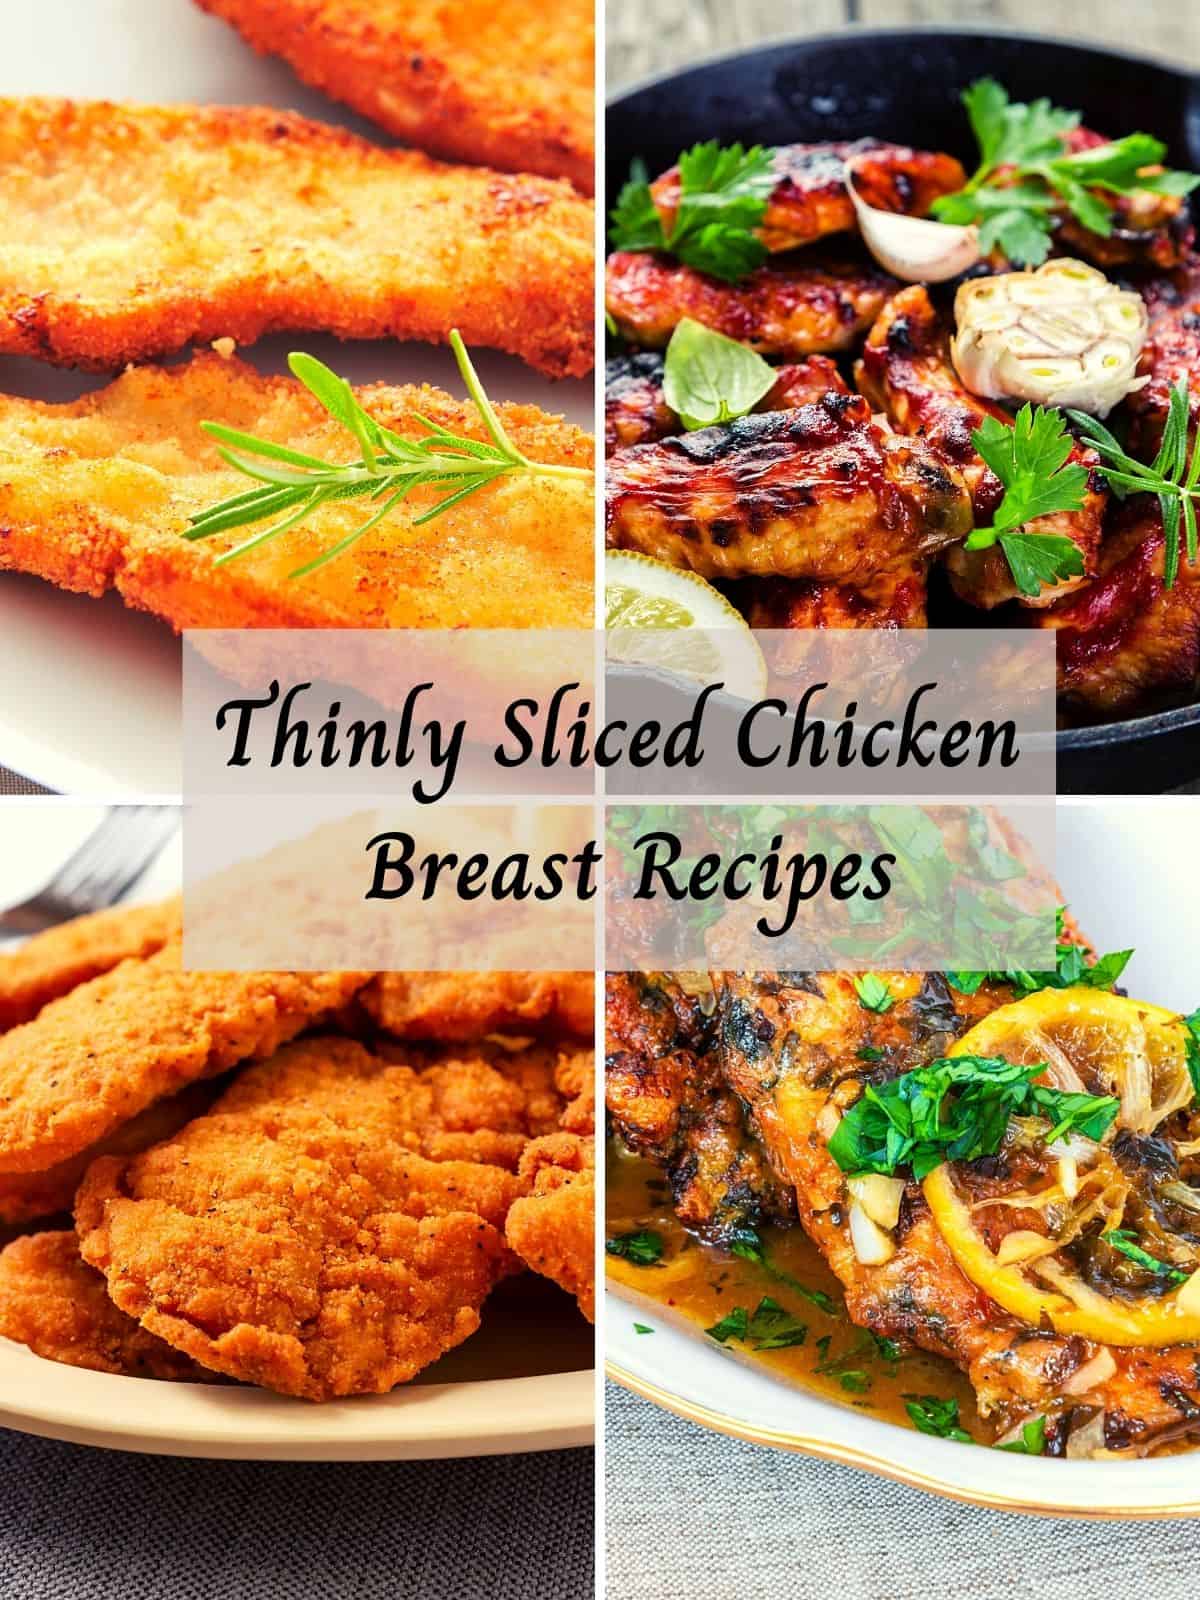 thinly sliced chicken breast recipes such as chicken skillet, chicken francese, sliced chicken breasts shown in the collage